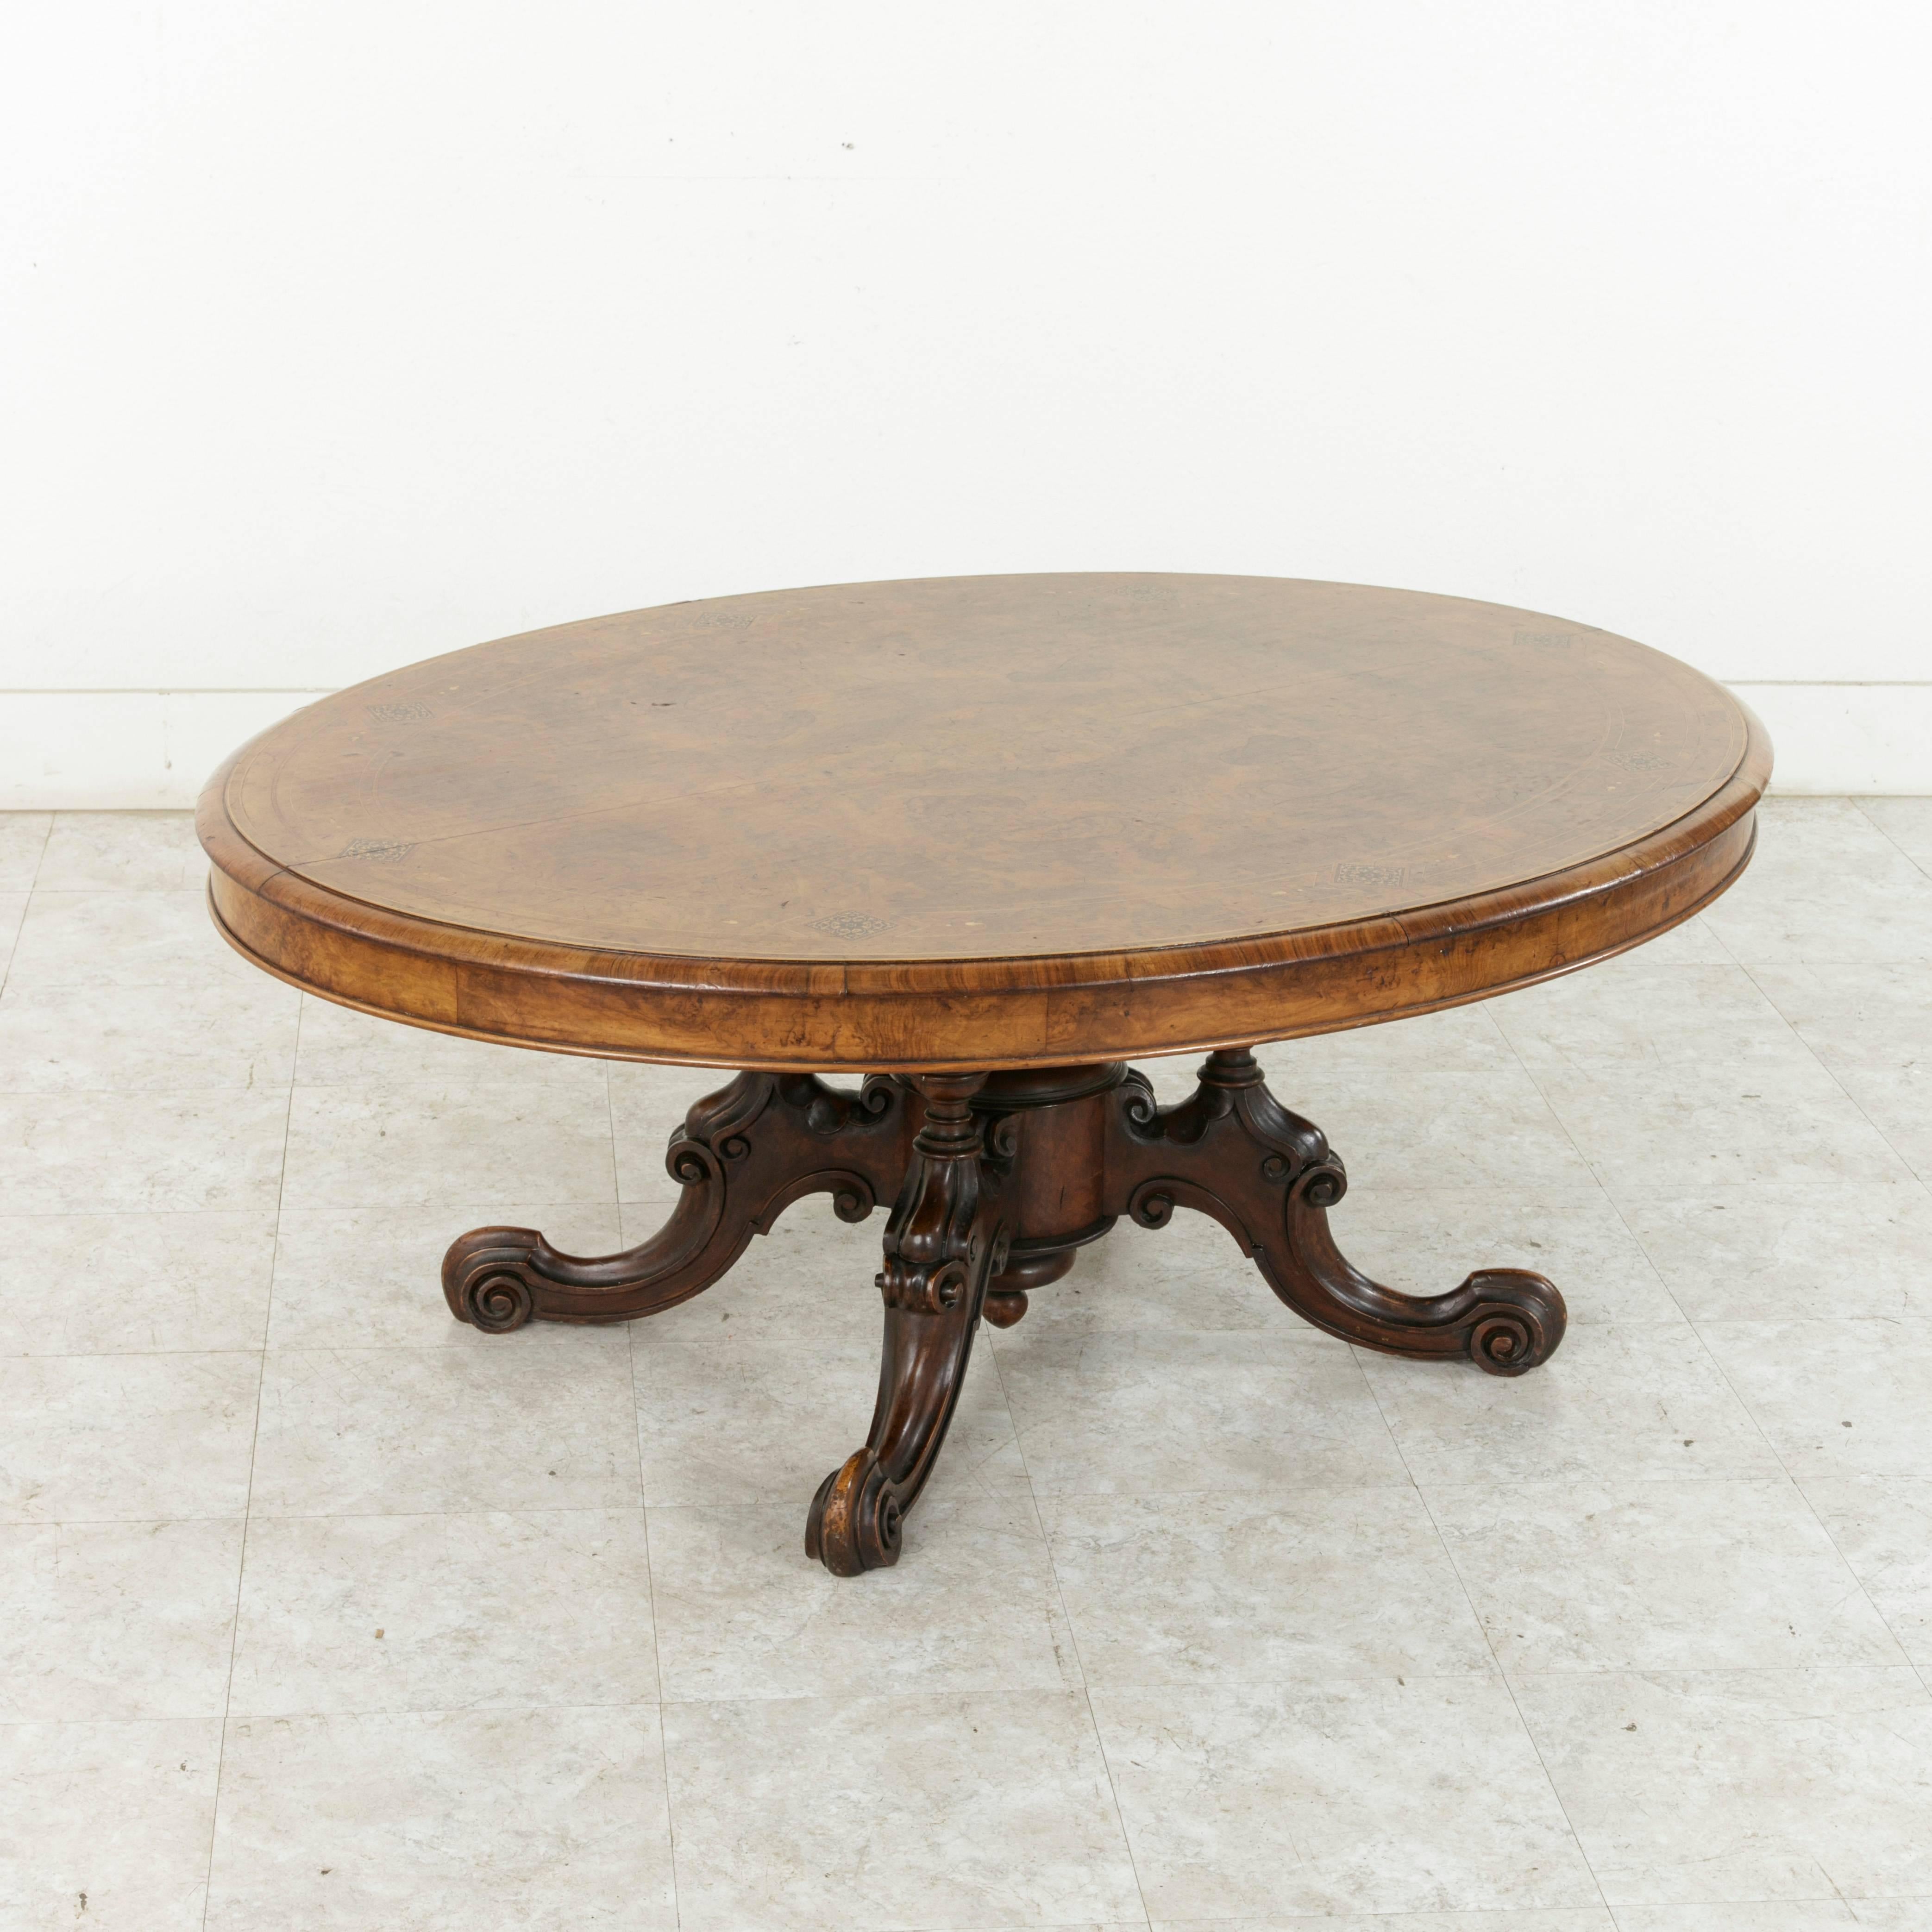 The English loo table is a model table from the 18th and 19th centuries, originally designed for the card game loo, which was also known as lanterloo. This Fine example from the Victorian age features a bevelled oval top of burl walnut inlaid with